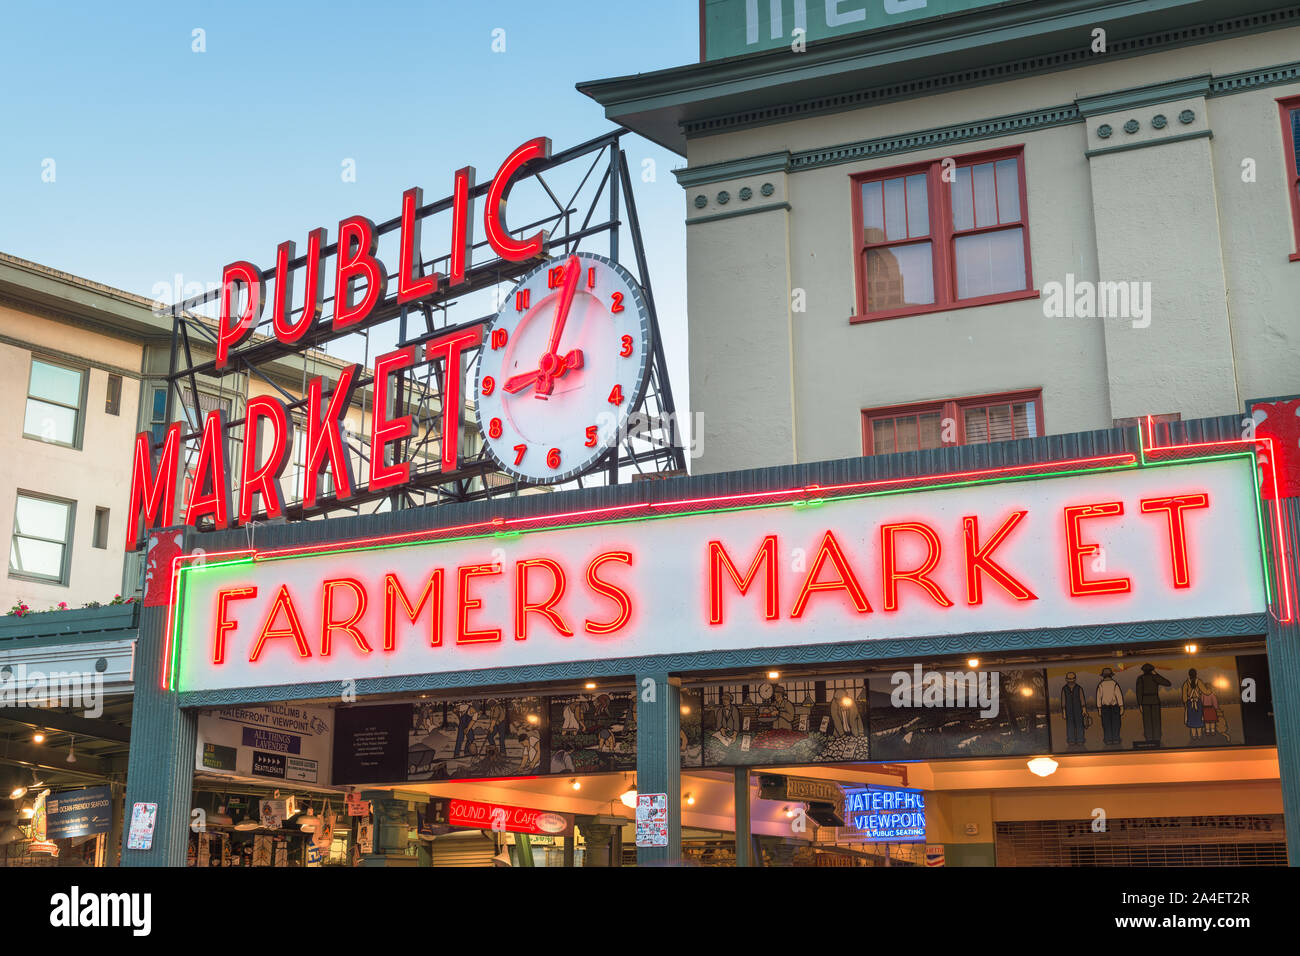 SEATTLE; WASHINGTON - July 2; 2018: Pike Place Market at night. The popular tourist destination opened in 1907 and is one of the oldest continuously o Stock Photo